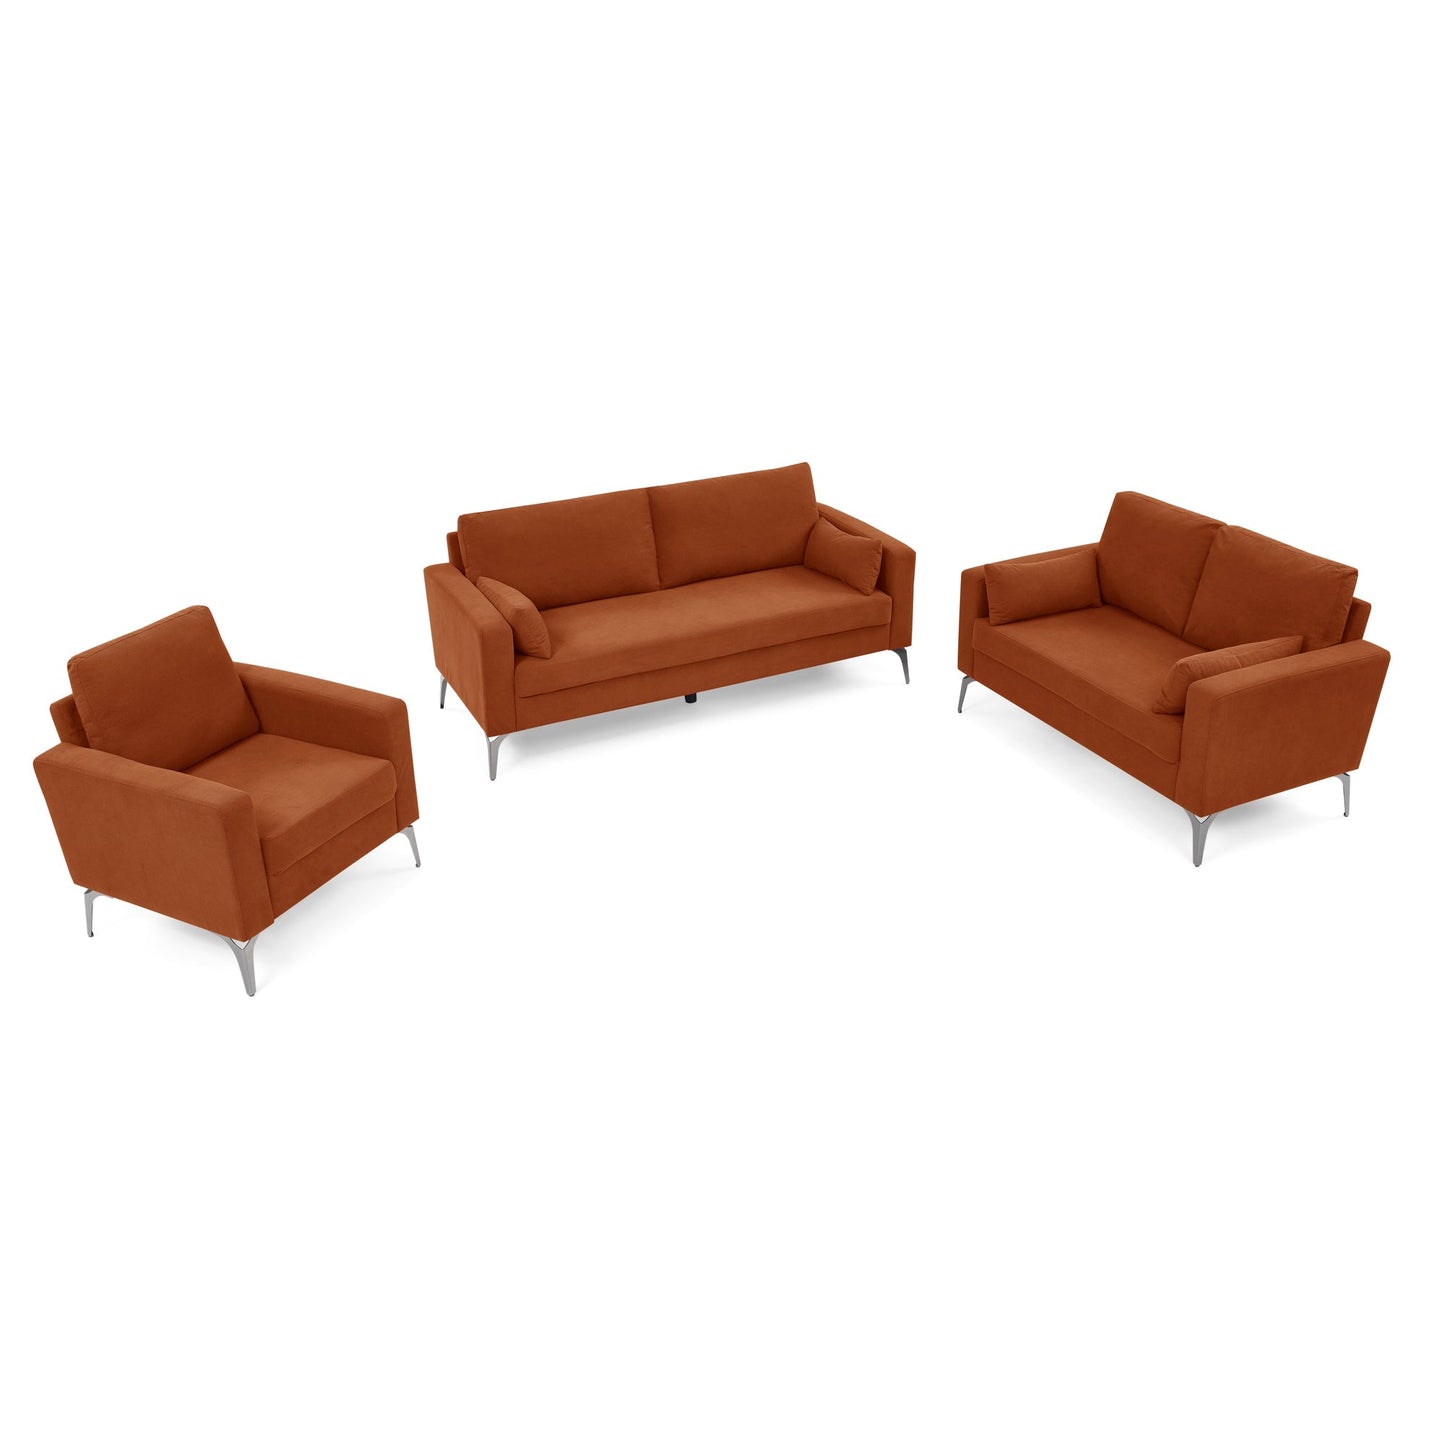 3 Piece Living Room Sofa Set, including 3-Seater Sofa, Loveseat and